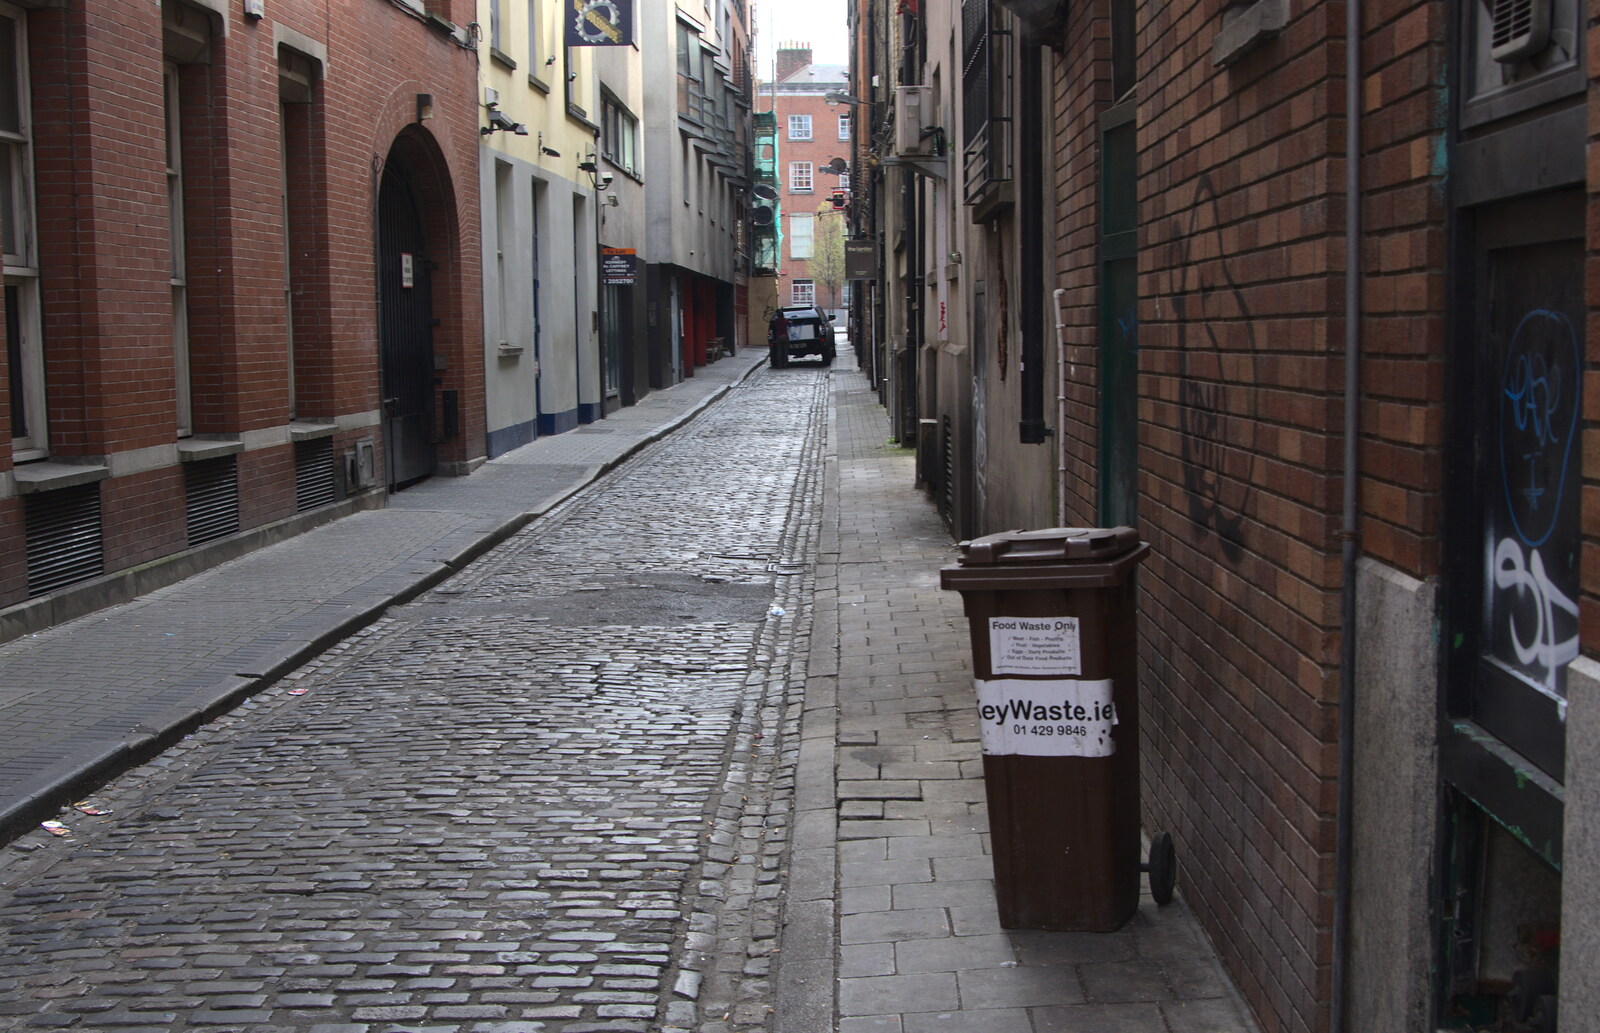 A cobbled Dublin back alley from Temple Bar and Dun Laoghaire, Dublin, Ireland - 16th April 2015